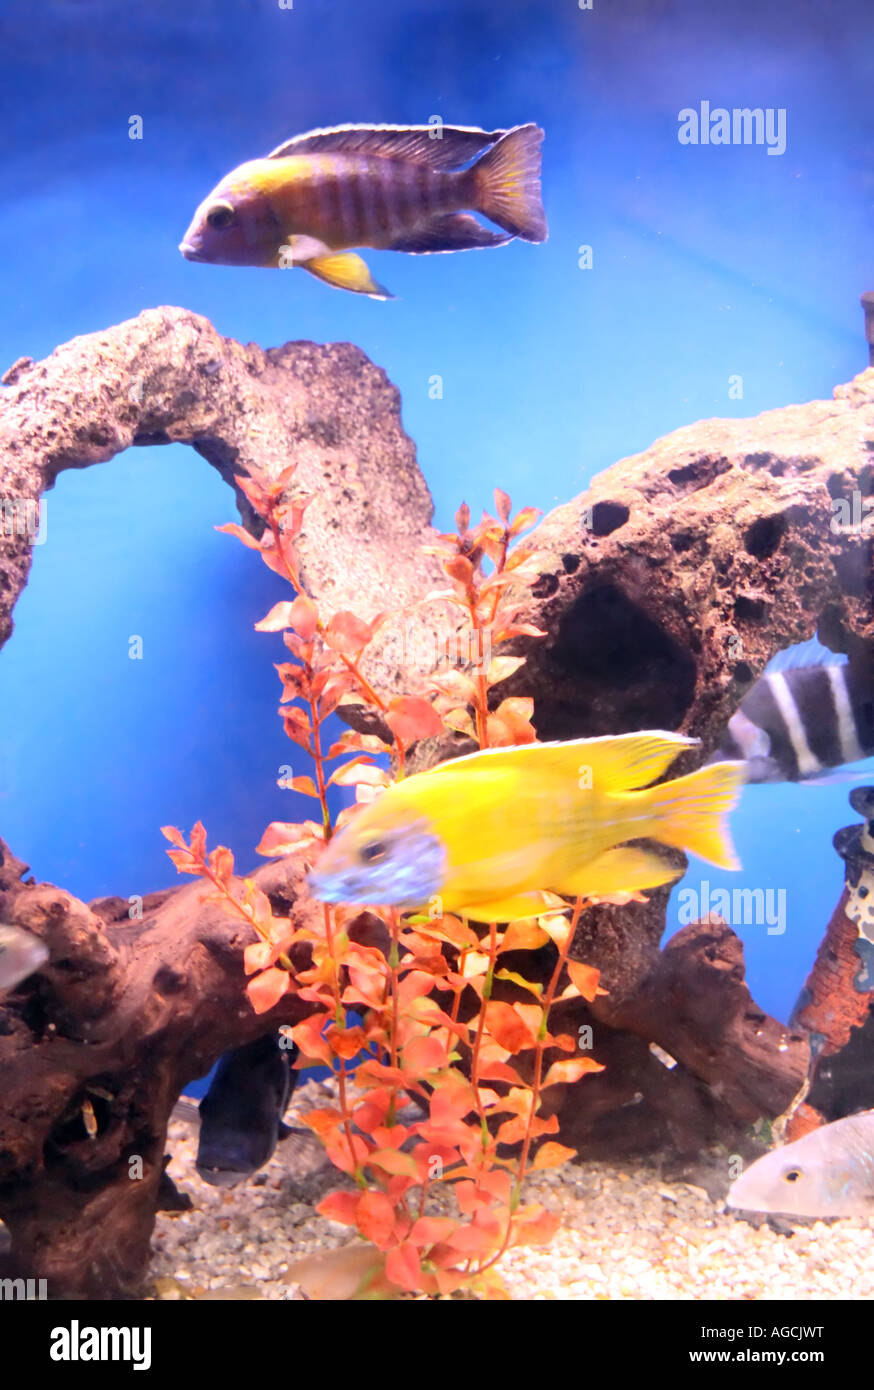 A tank filled with colorful cichlids, swimming in front of a soothing blue background and around arched coral. Stock Photo